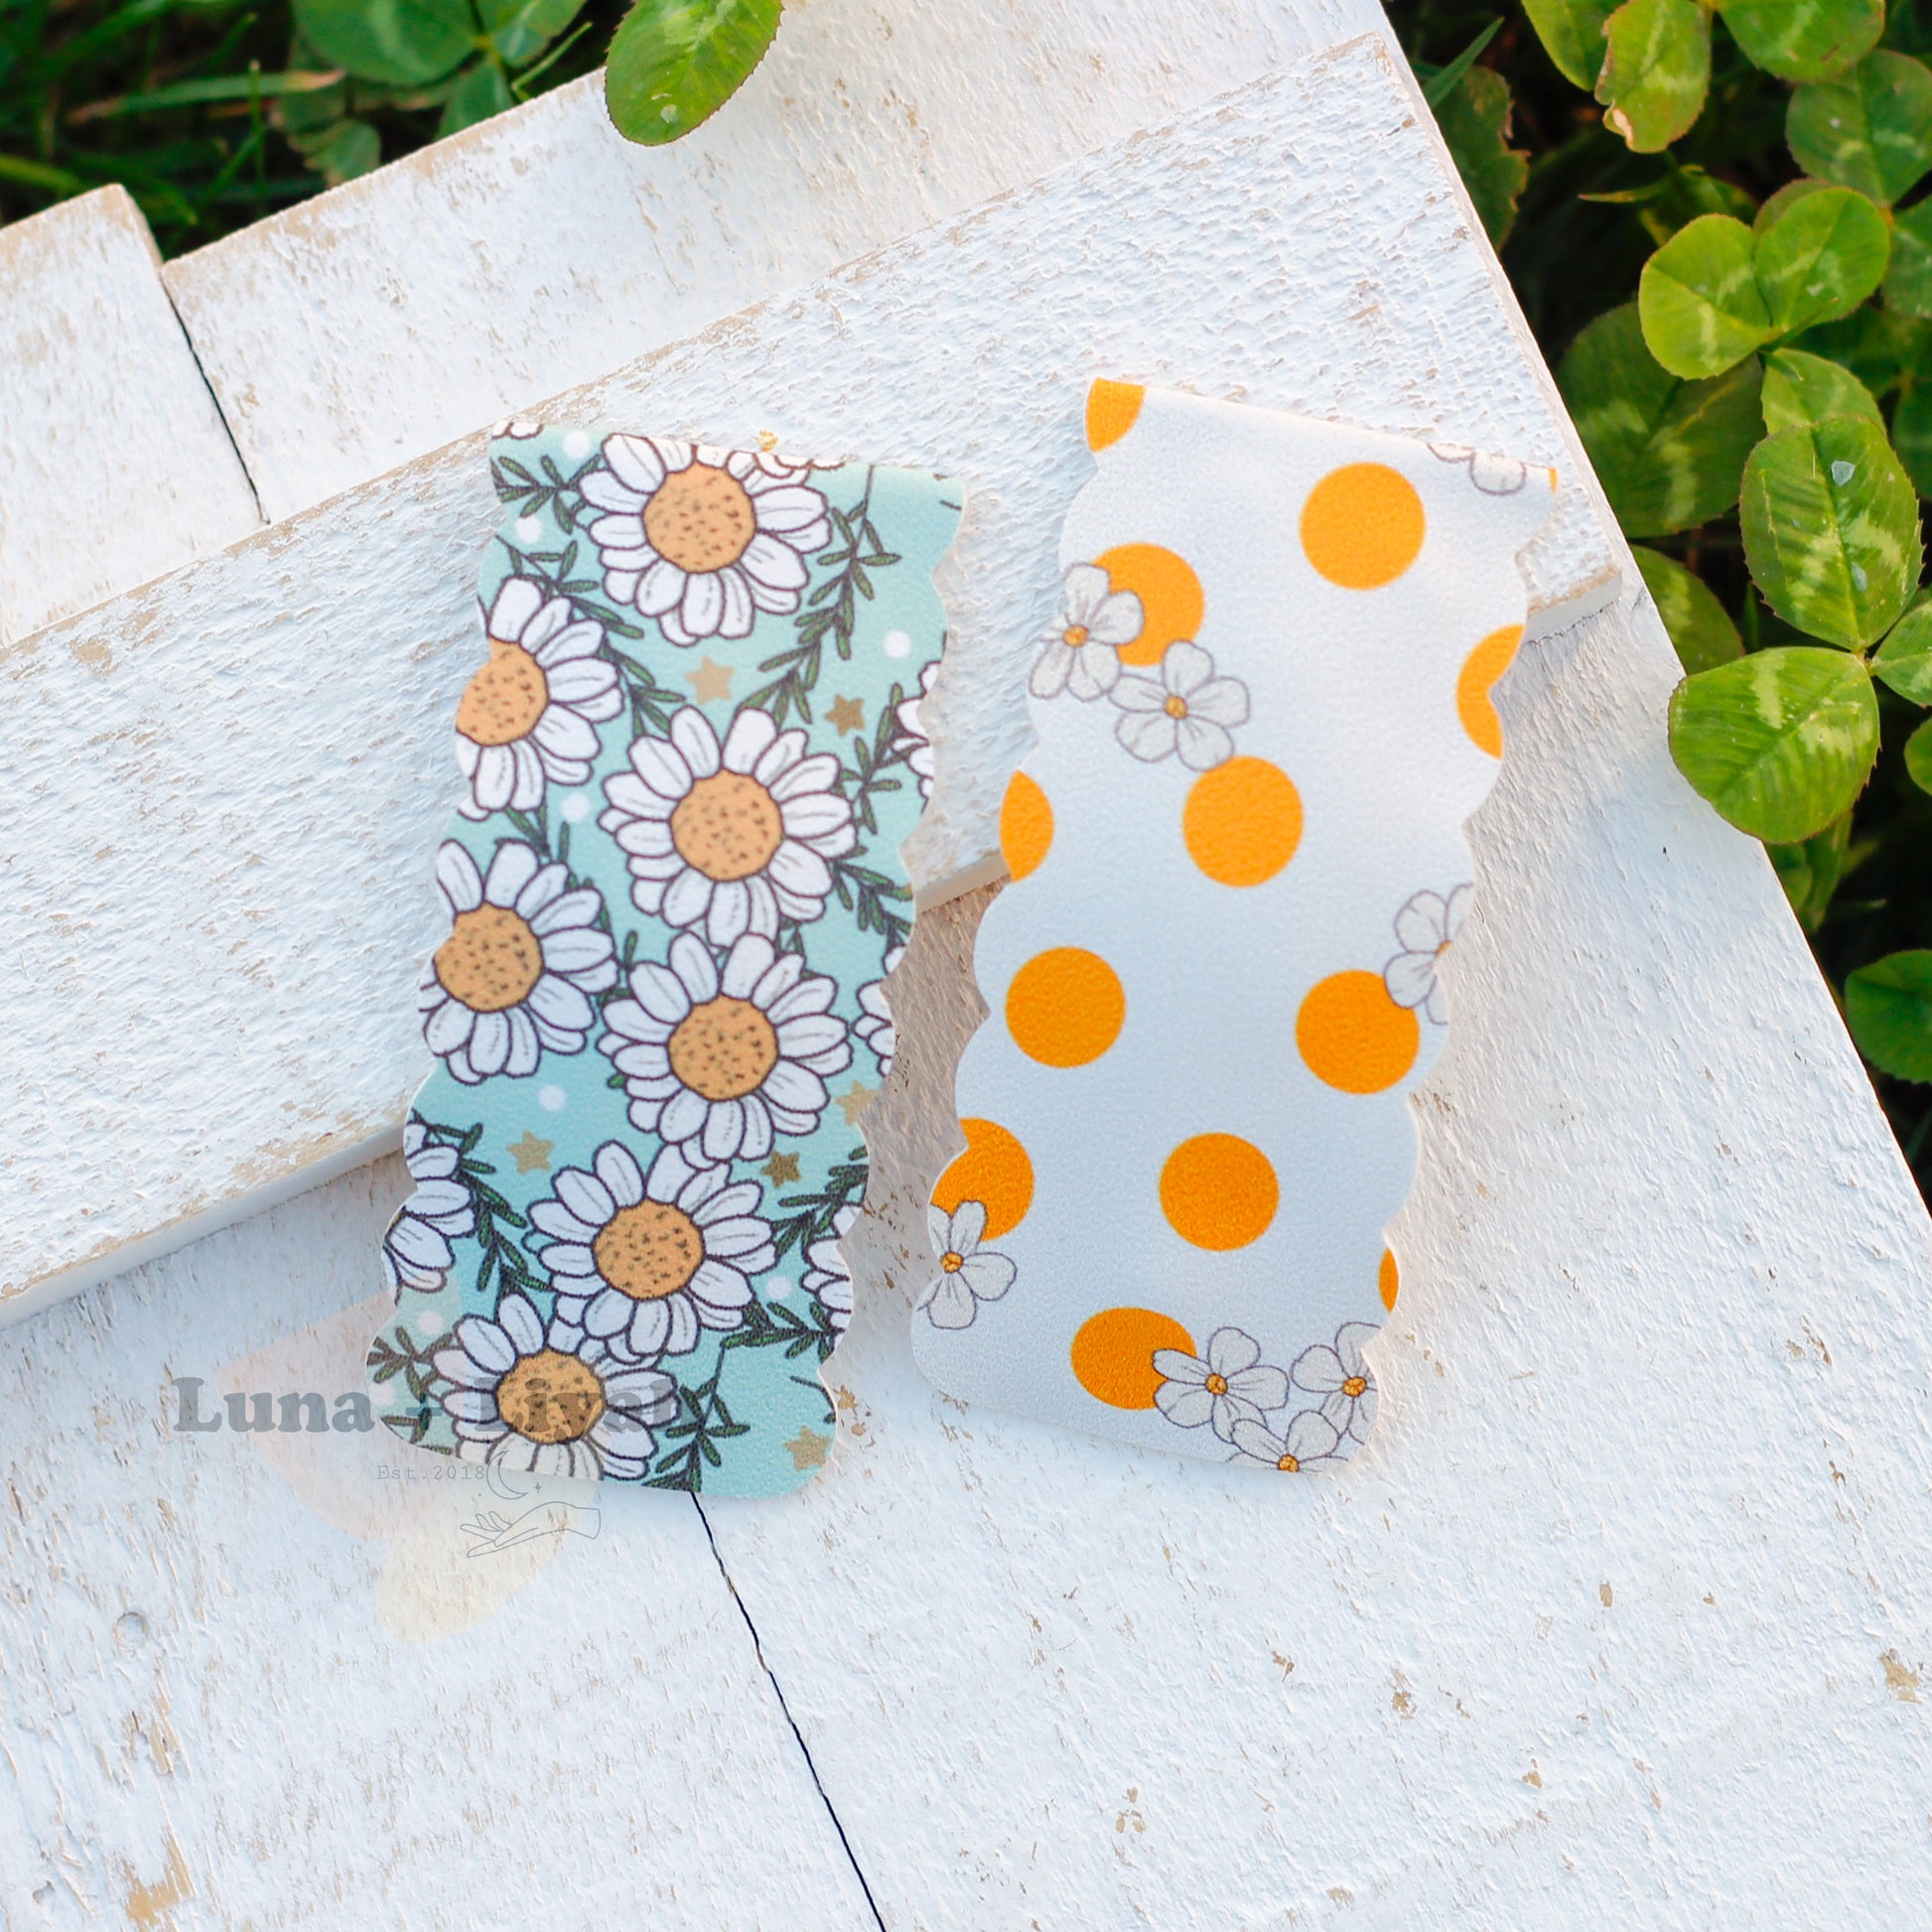 snap clip - blue daisy/marigold dots and flowers